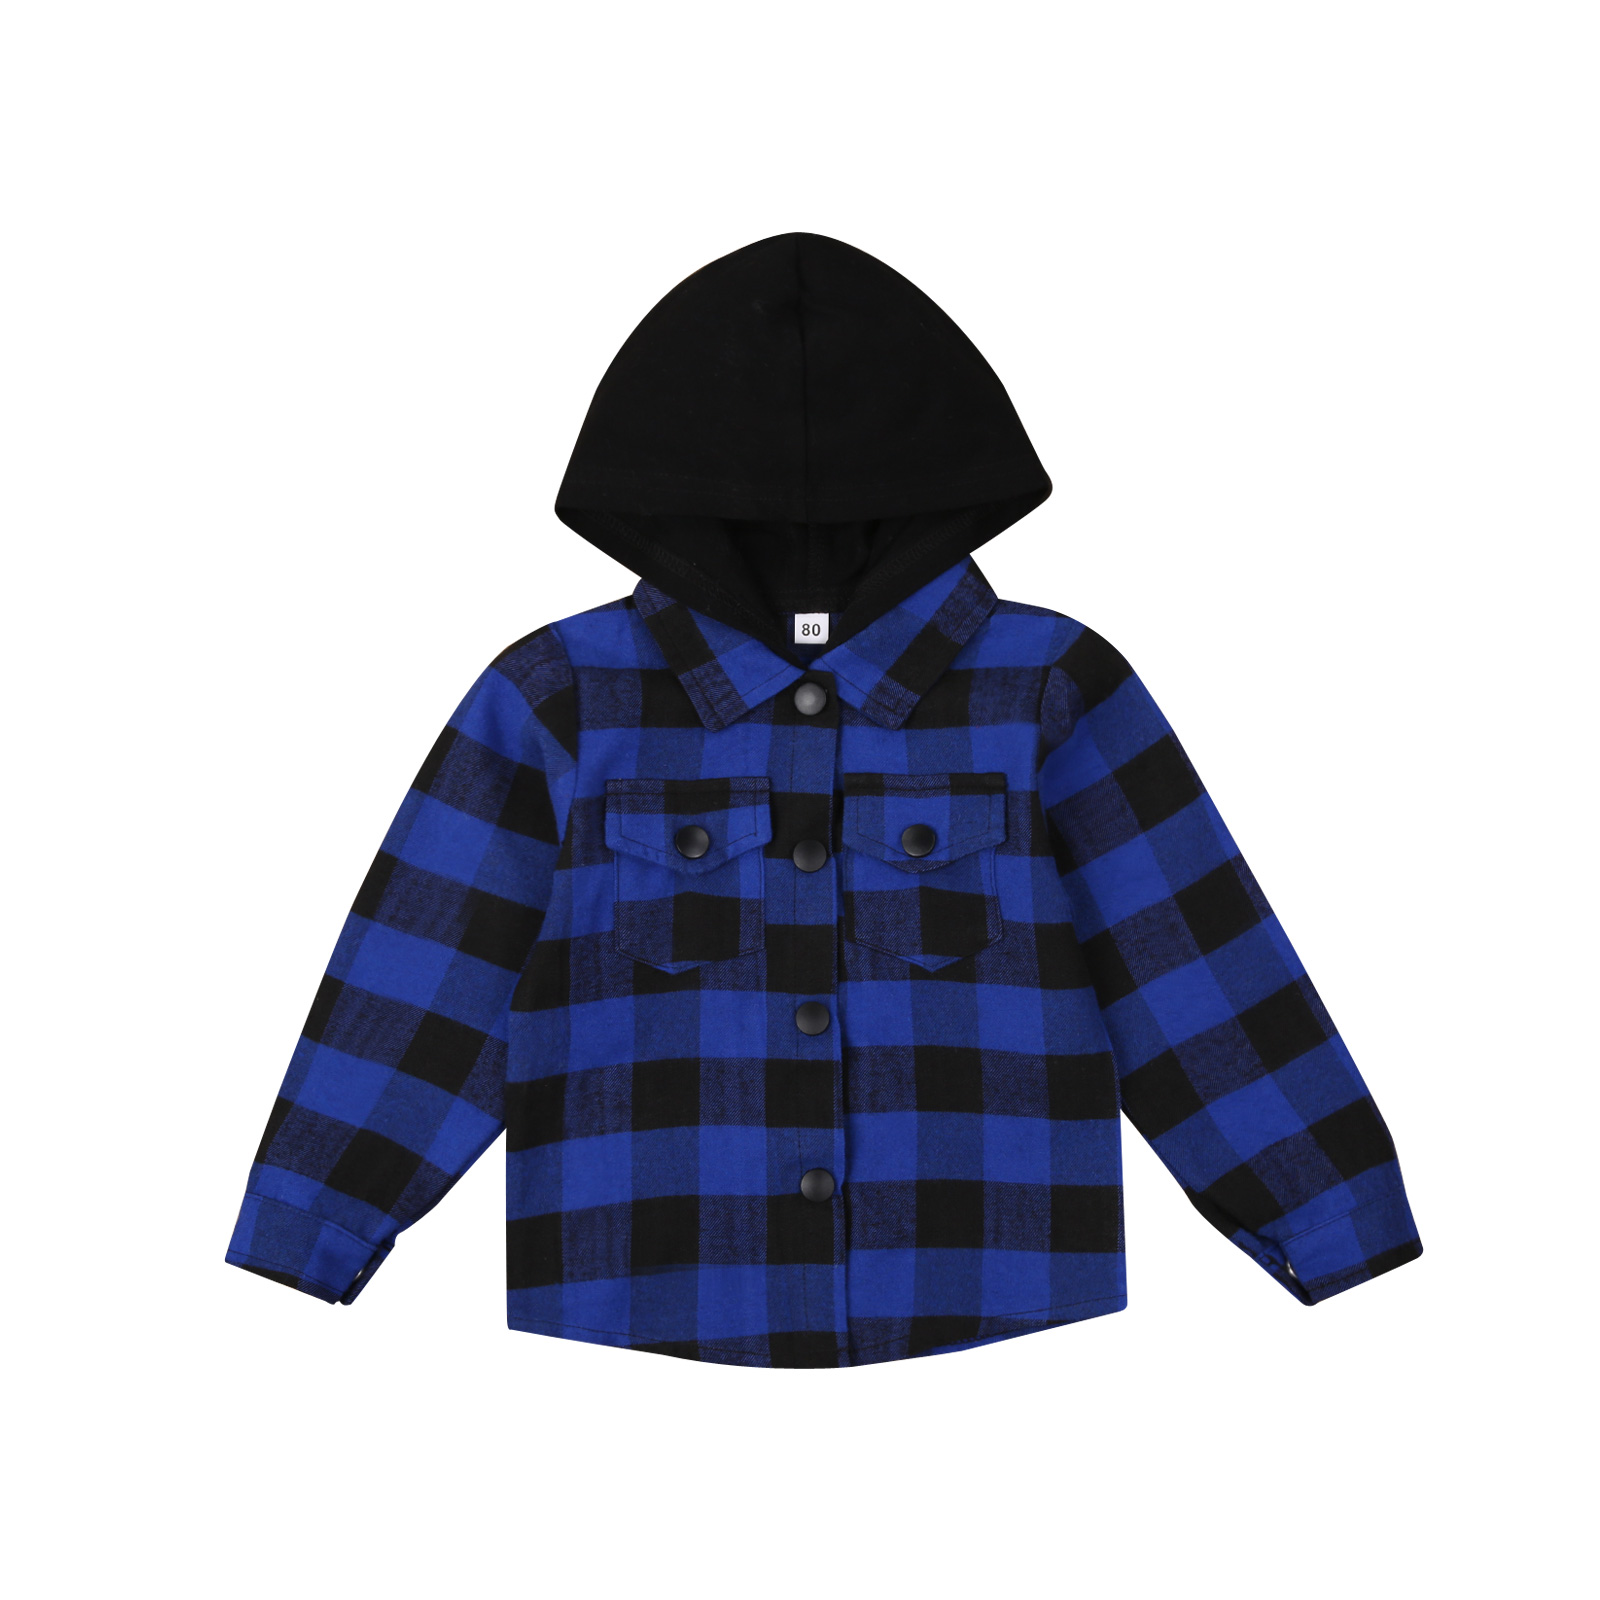 OPPERIAYA Infant Plaid Pattern autumn casual soft Sweatshirts Baby Long Sleeve Single-breasted Hoodie with Flap Pockets